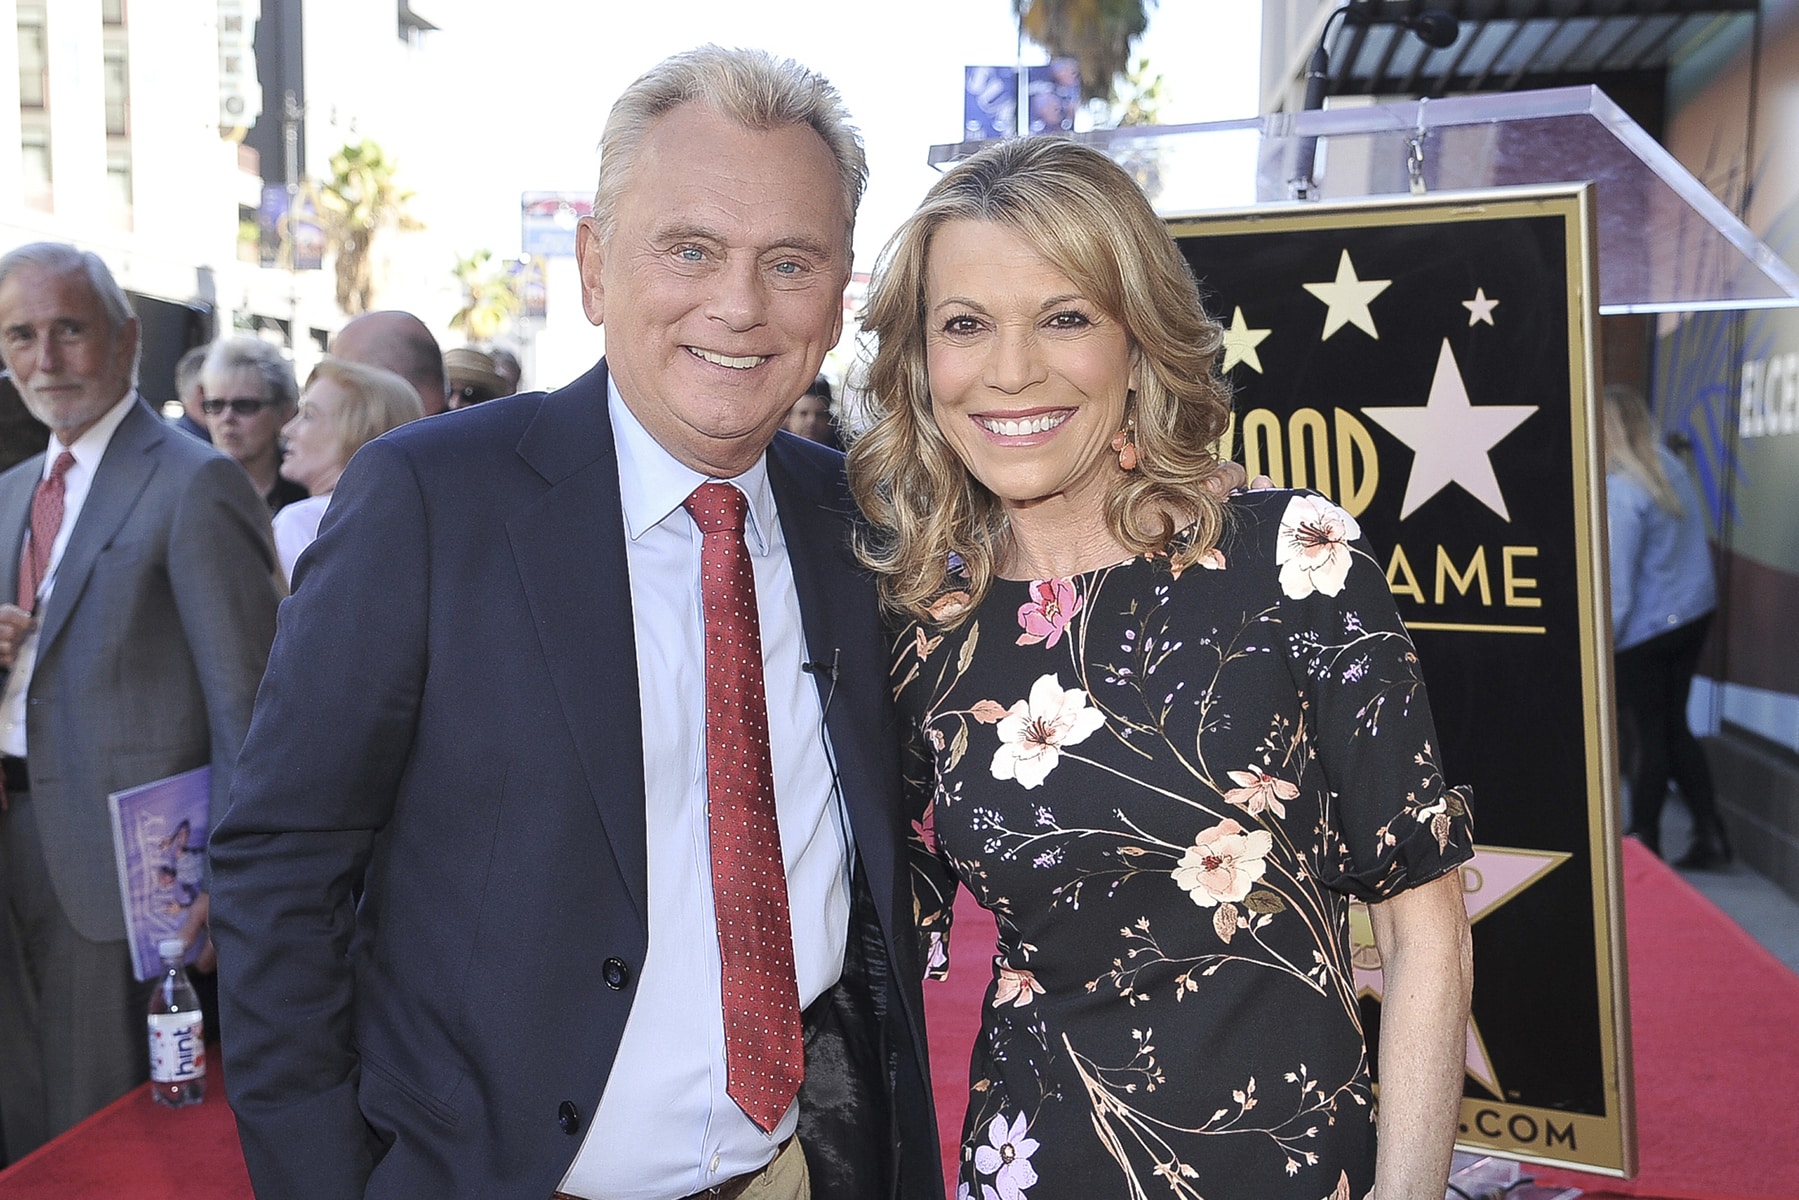 Pat Sajak makes final spin as host of ‘Wheel of Fortune’